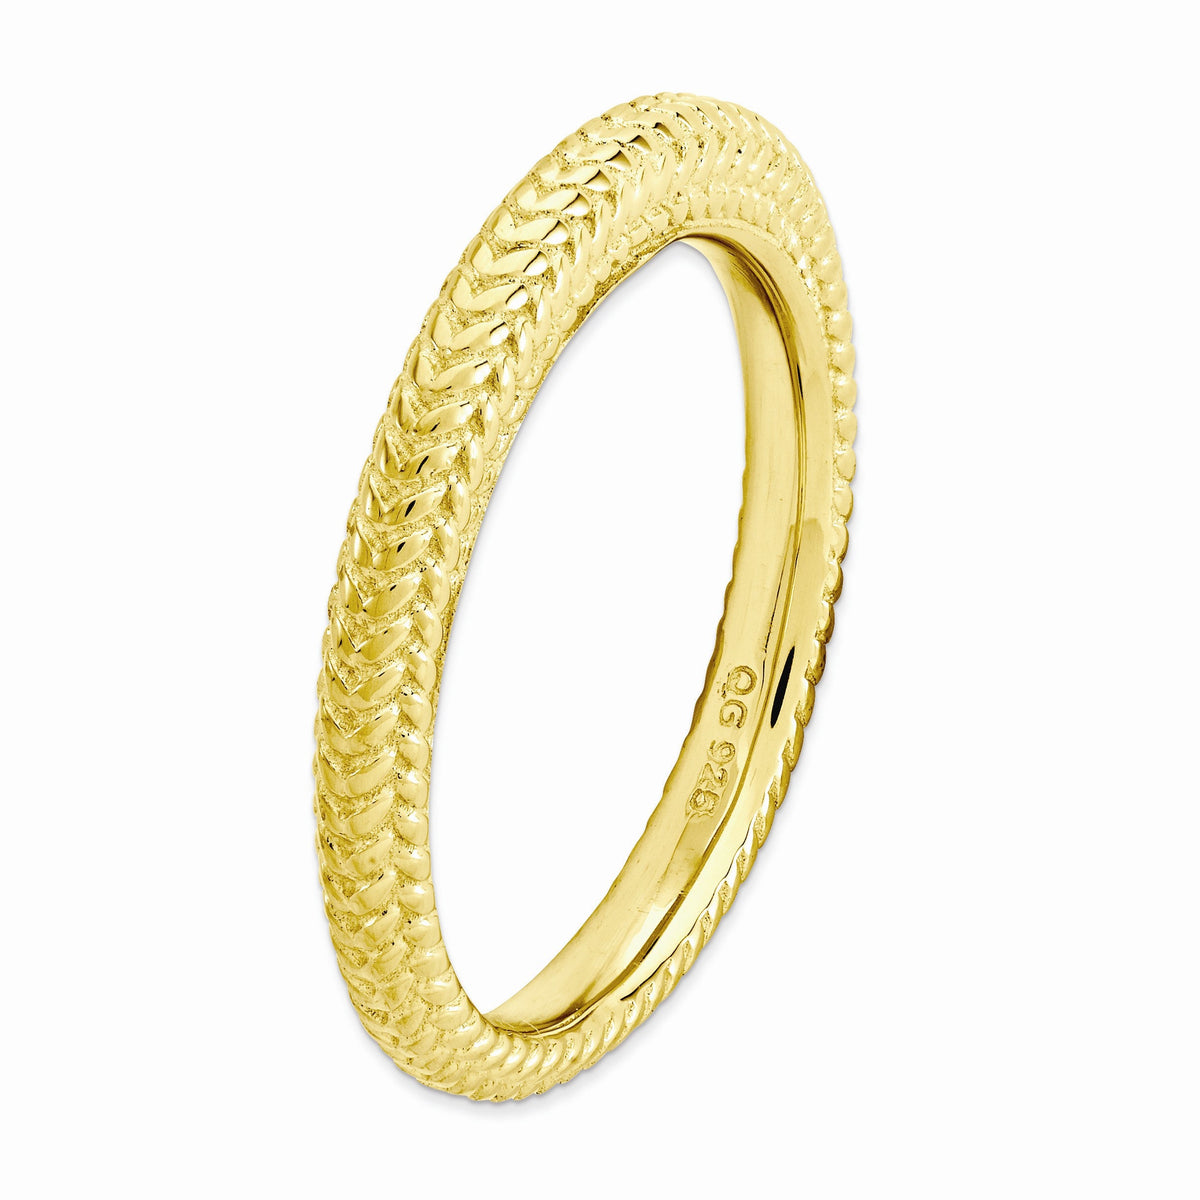 Alternate view of the Stackable 14K Yellow Gold Plated Silver Domed Wheat Band by The Black Bow Jewelry Co.